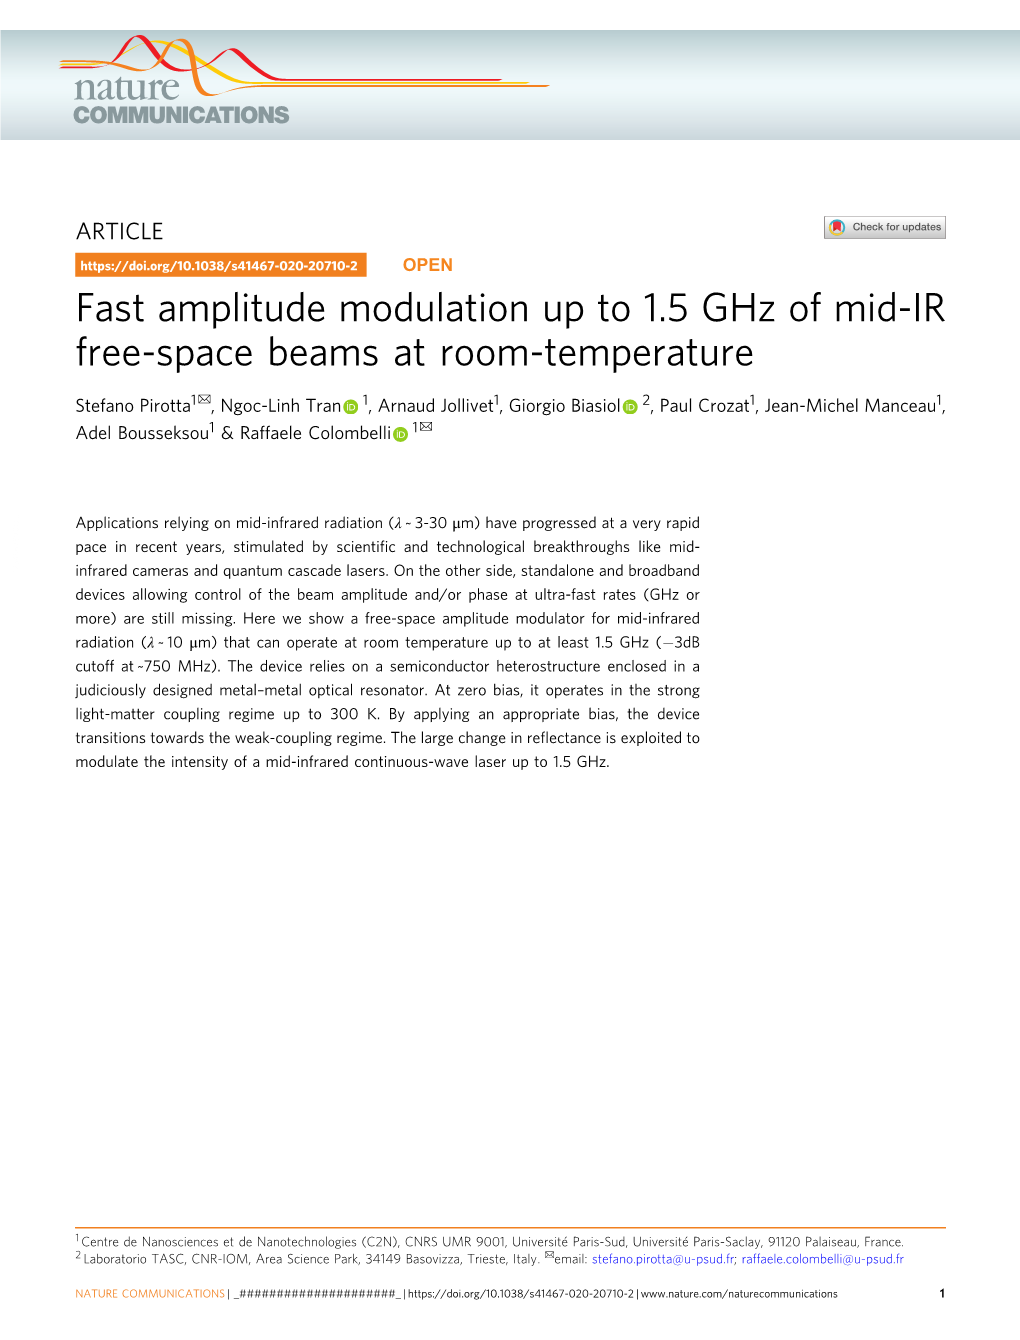 Fast Amplitude Modulation up to 1.5 Ghz of Mid-IR Free-Space Beams at Room-Temperature